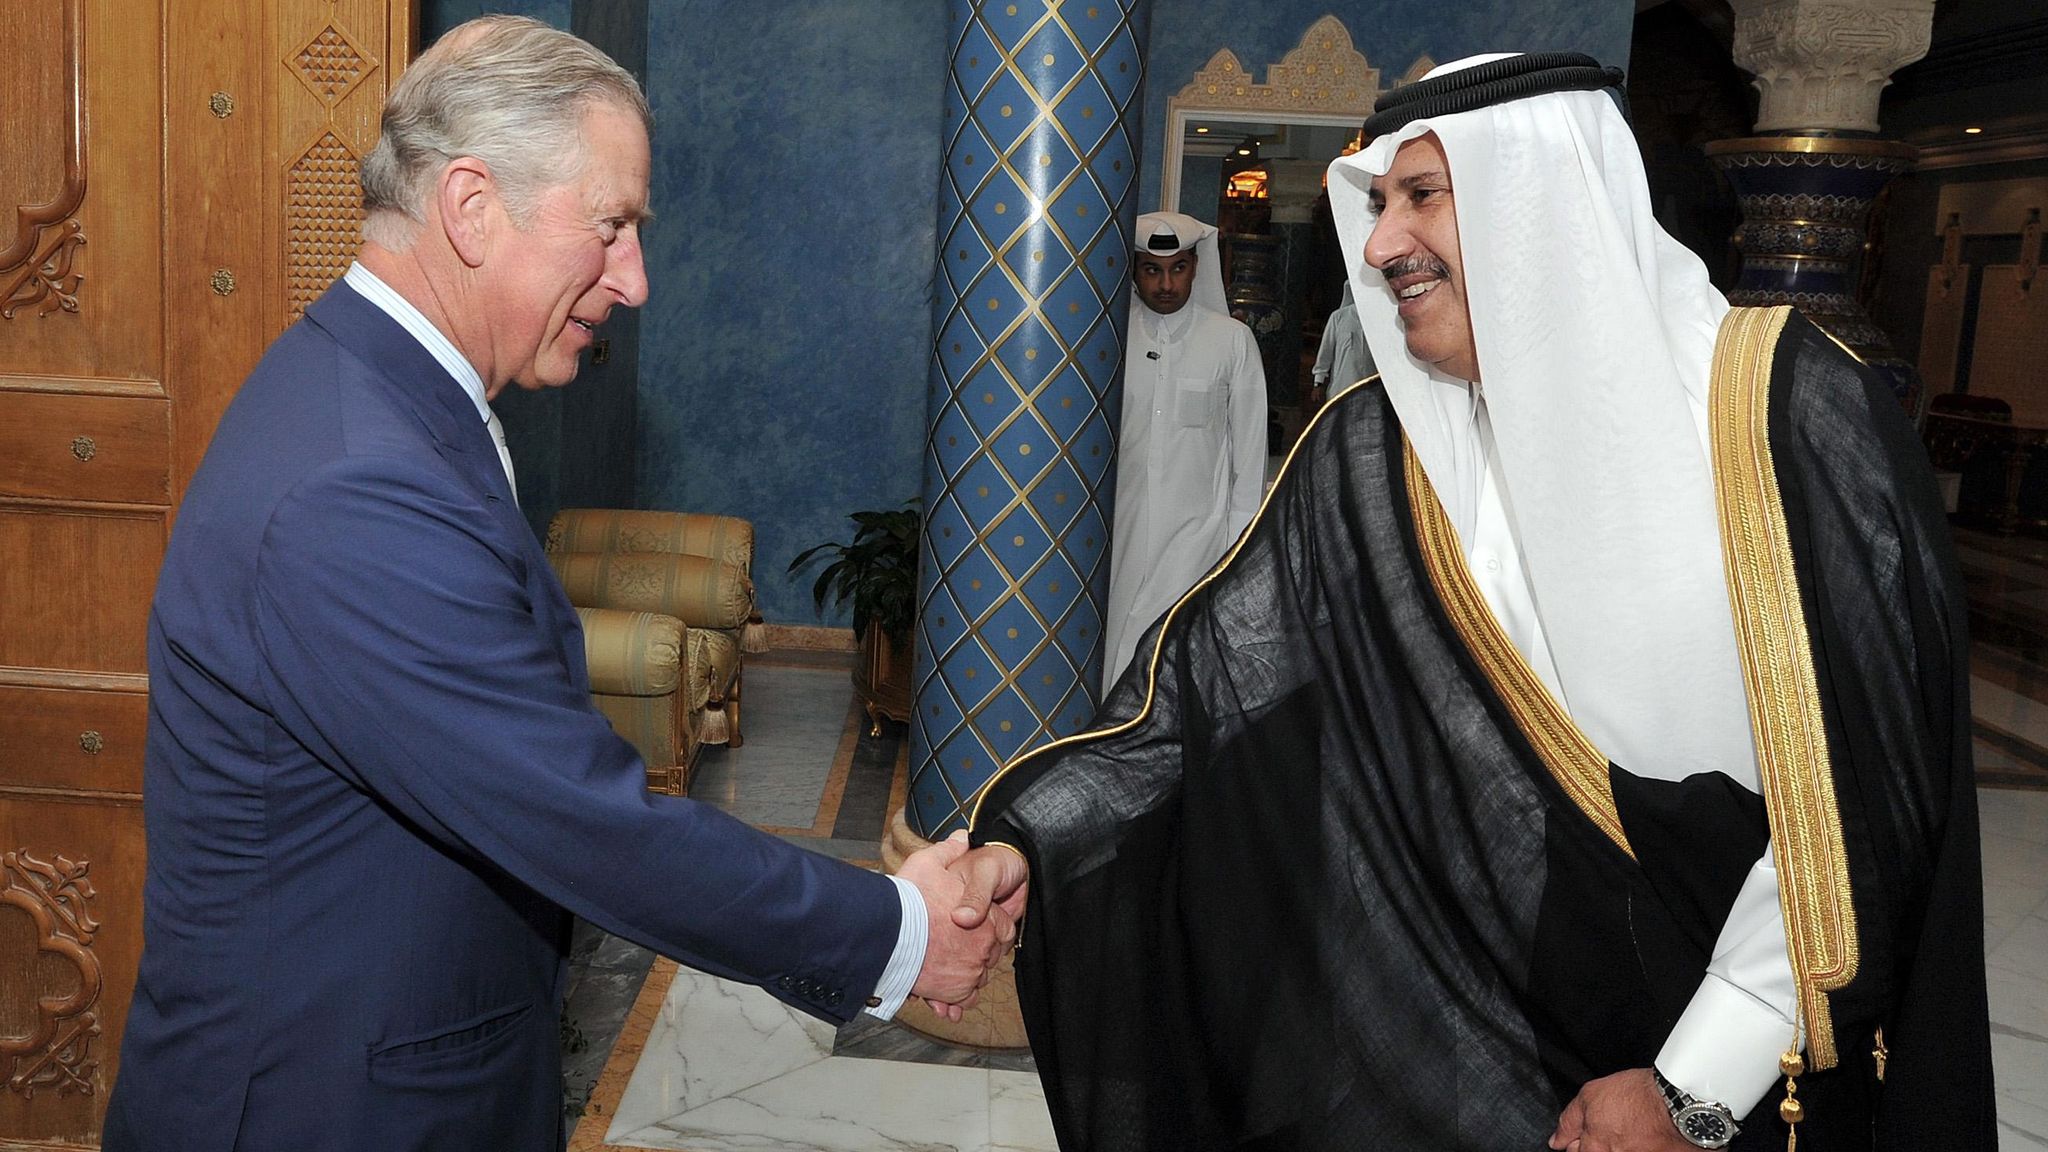 Prince Charles accepted carrier bag full of cash as a charity donation from Qatar ex-PM, claims Sunday Times | UK News | Sky News